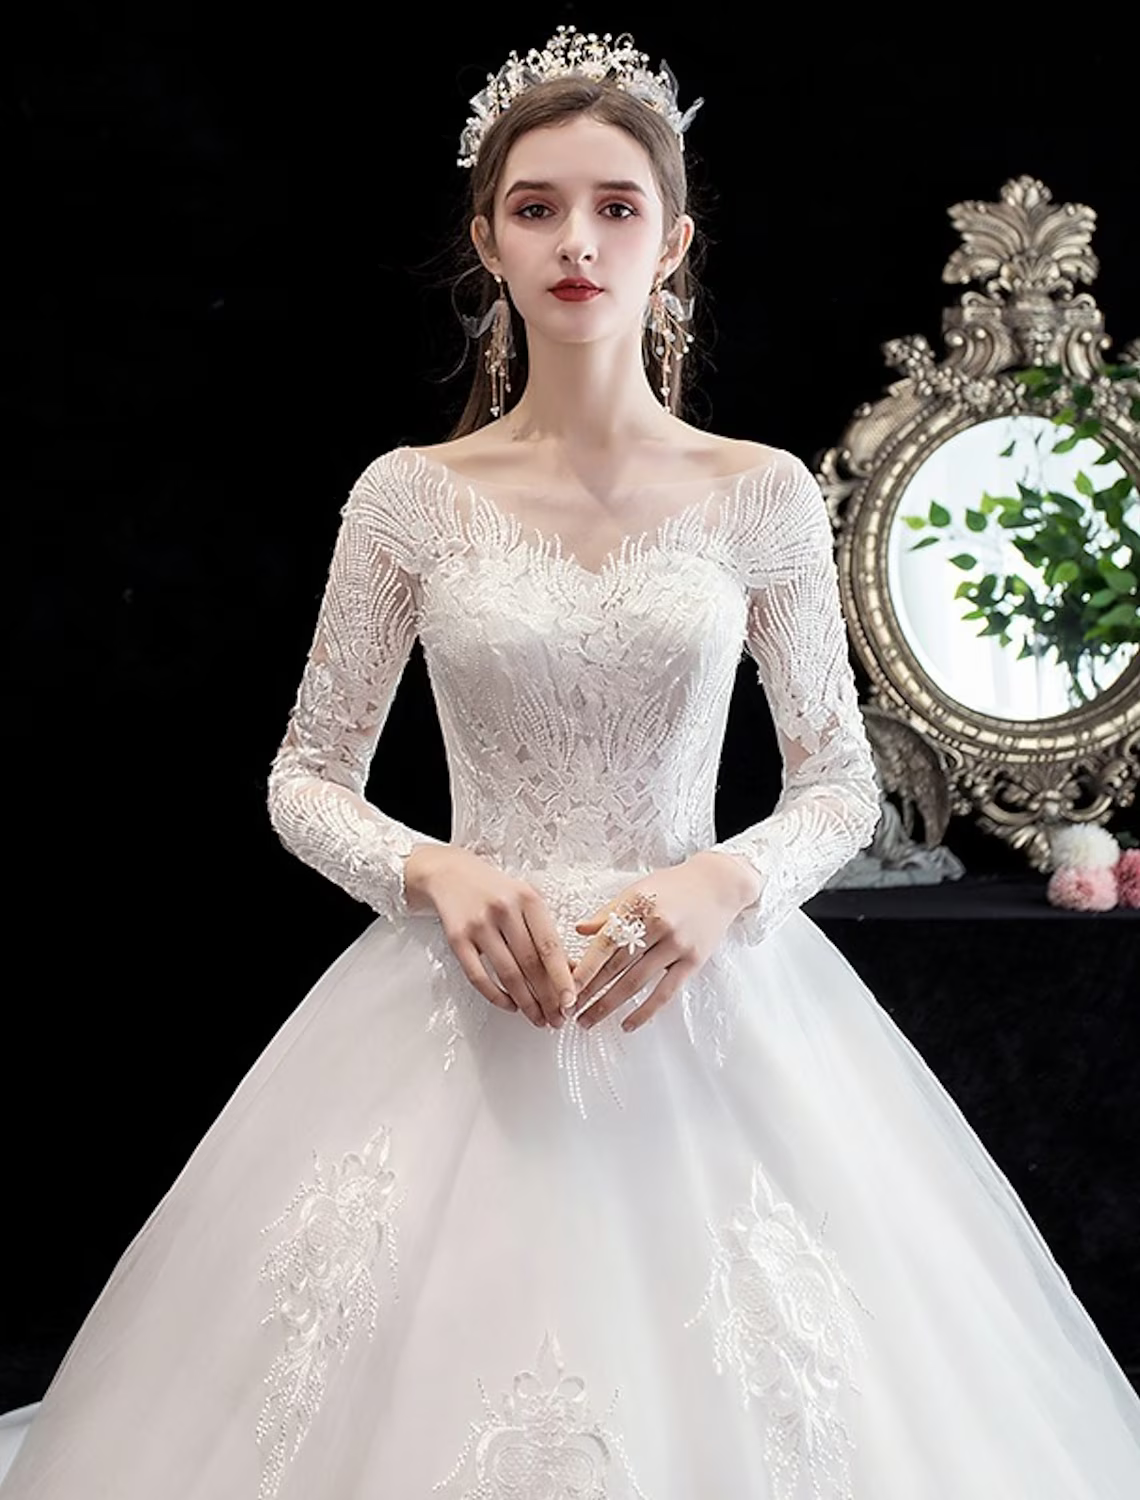 Engagement Formal Wedding Dresses Princess Long Sleeve Off Shoulder Lace With Beading Appliques